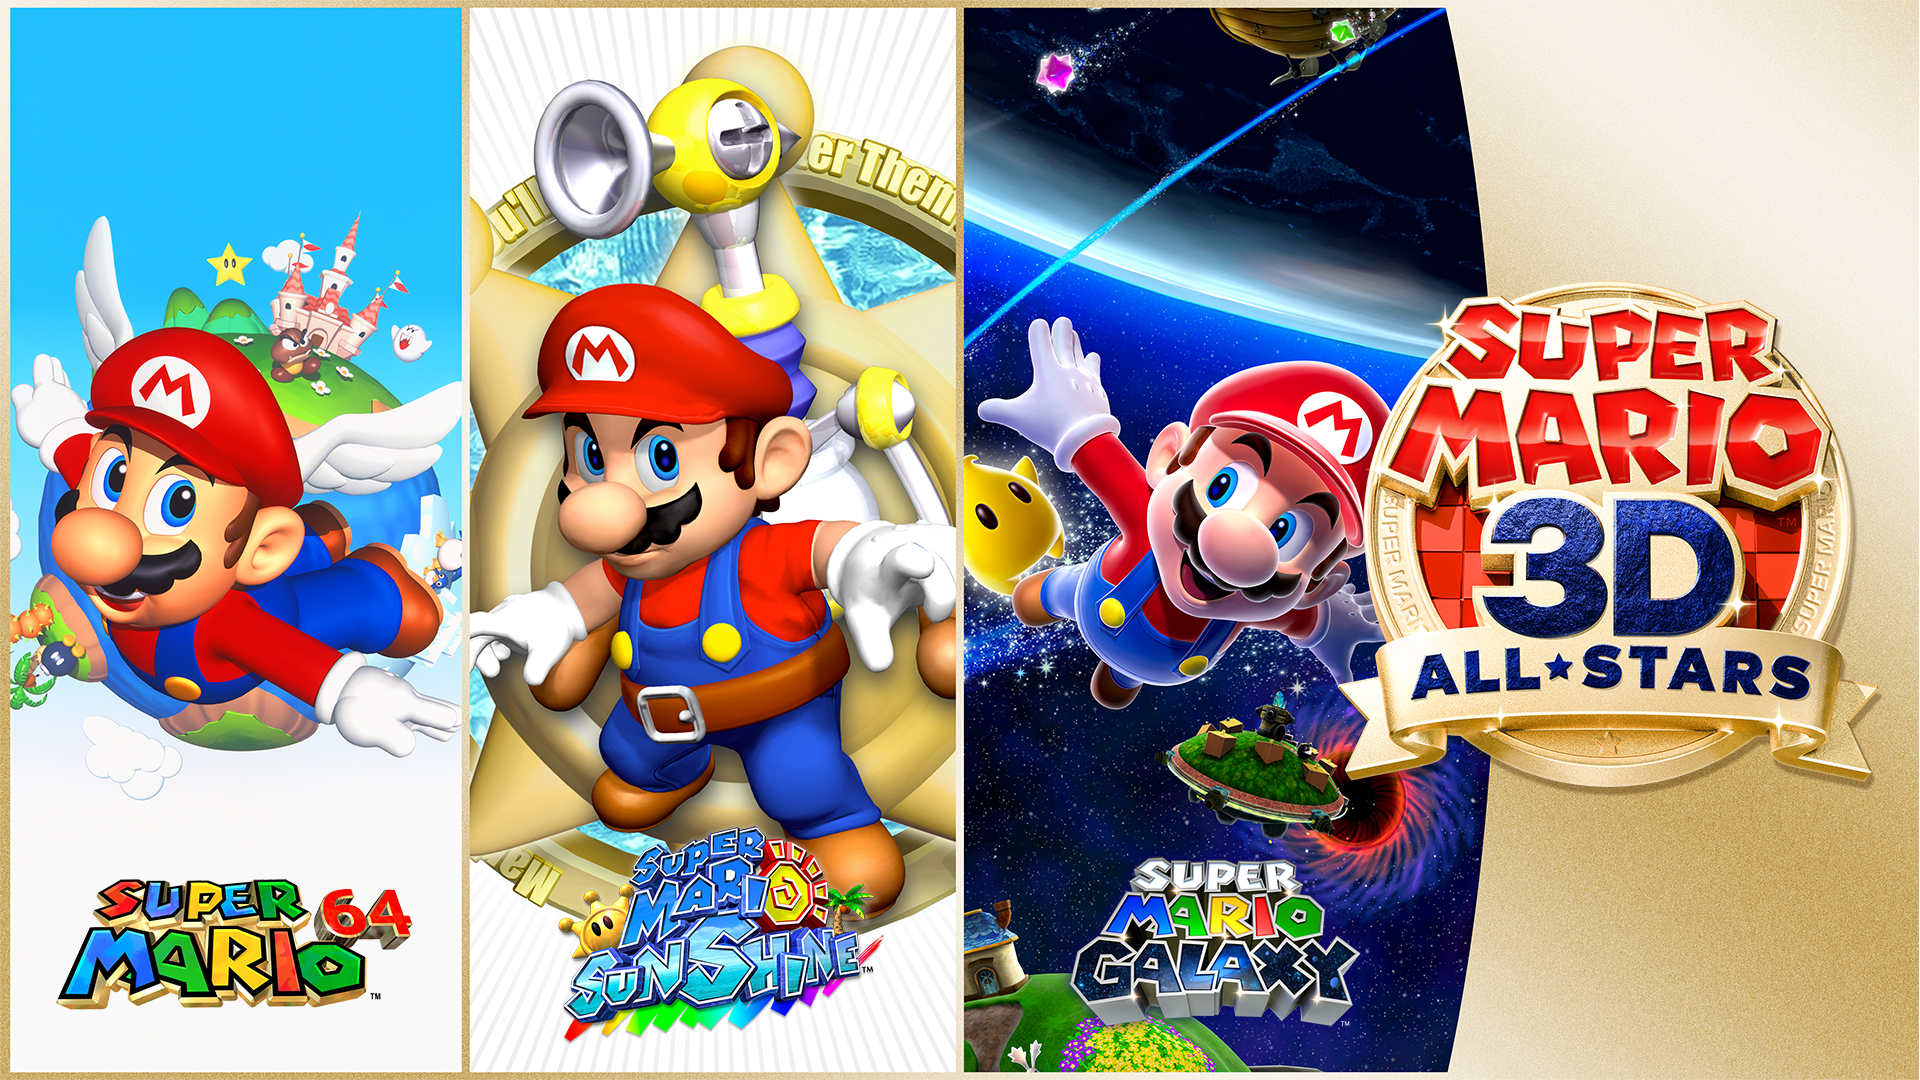 super-mario-3d-all-stars-goes-away-forever-on-march-31st-engadget